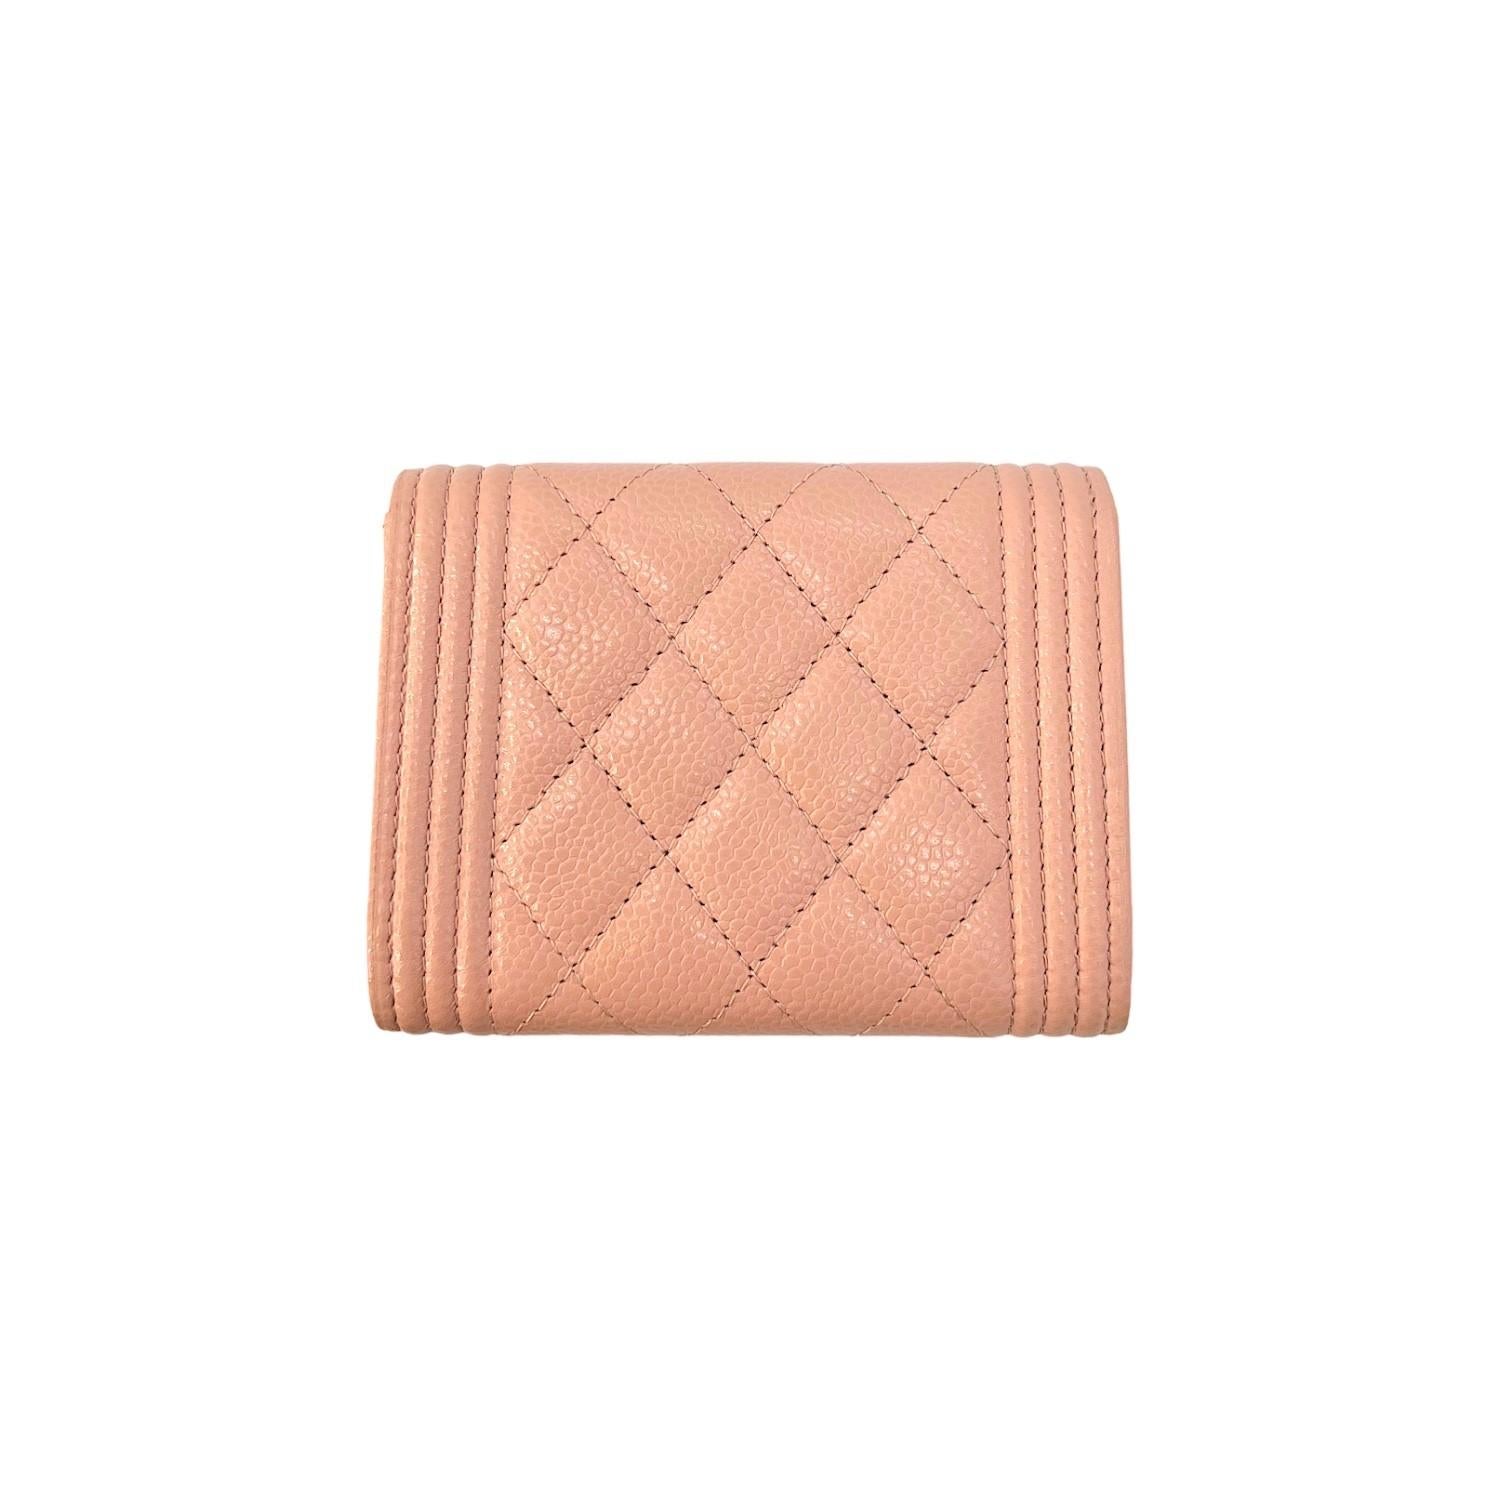 This Chanel Interlocking CC Trifold Wallet was made in Italy and it is finely crafted of pink quilted caviar leather with gold-tone hardware features. It has a fold over snap closure that opens up to a pink nylon interior with 3 pockets. It is also